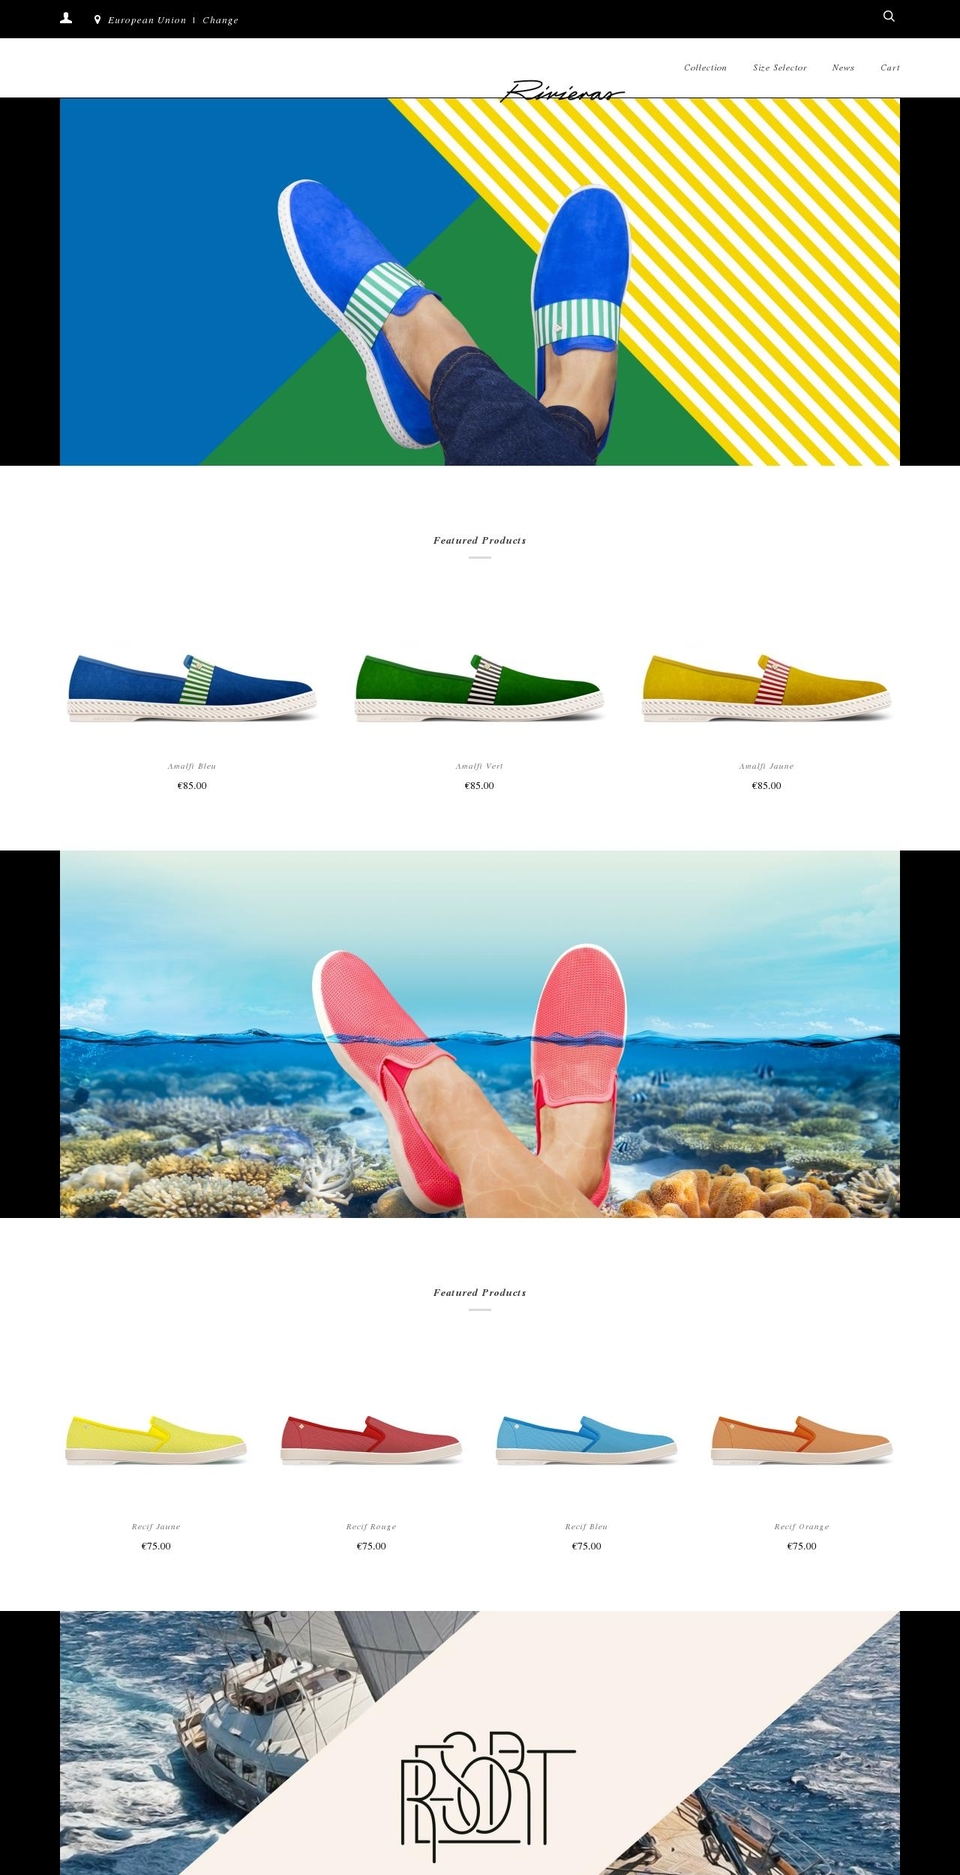 Rivieras [Plus]-TH-July-30-2018 Shopify theme site example rivieras-shoes.us